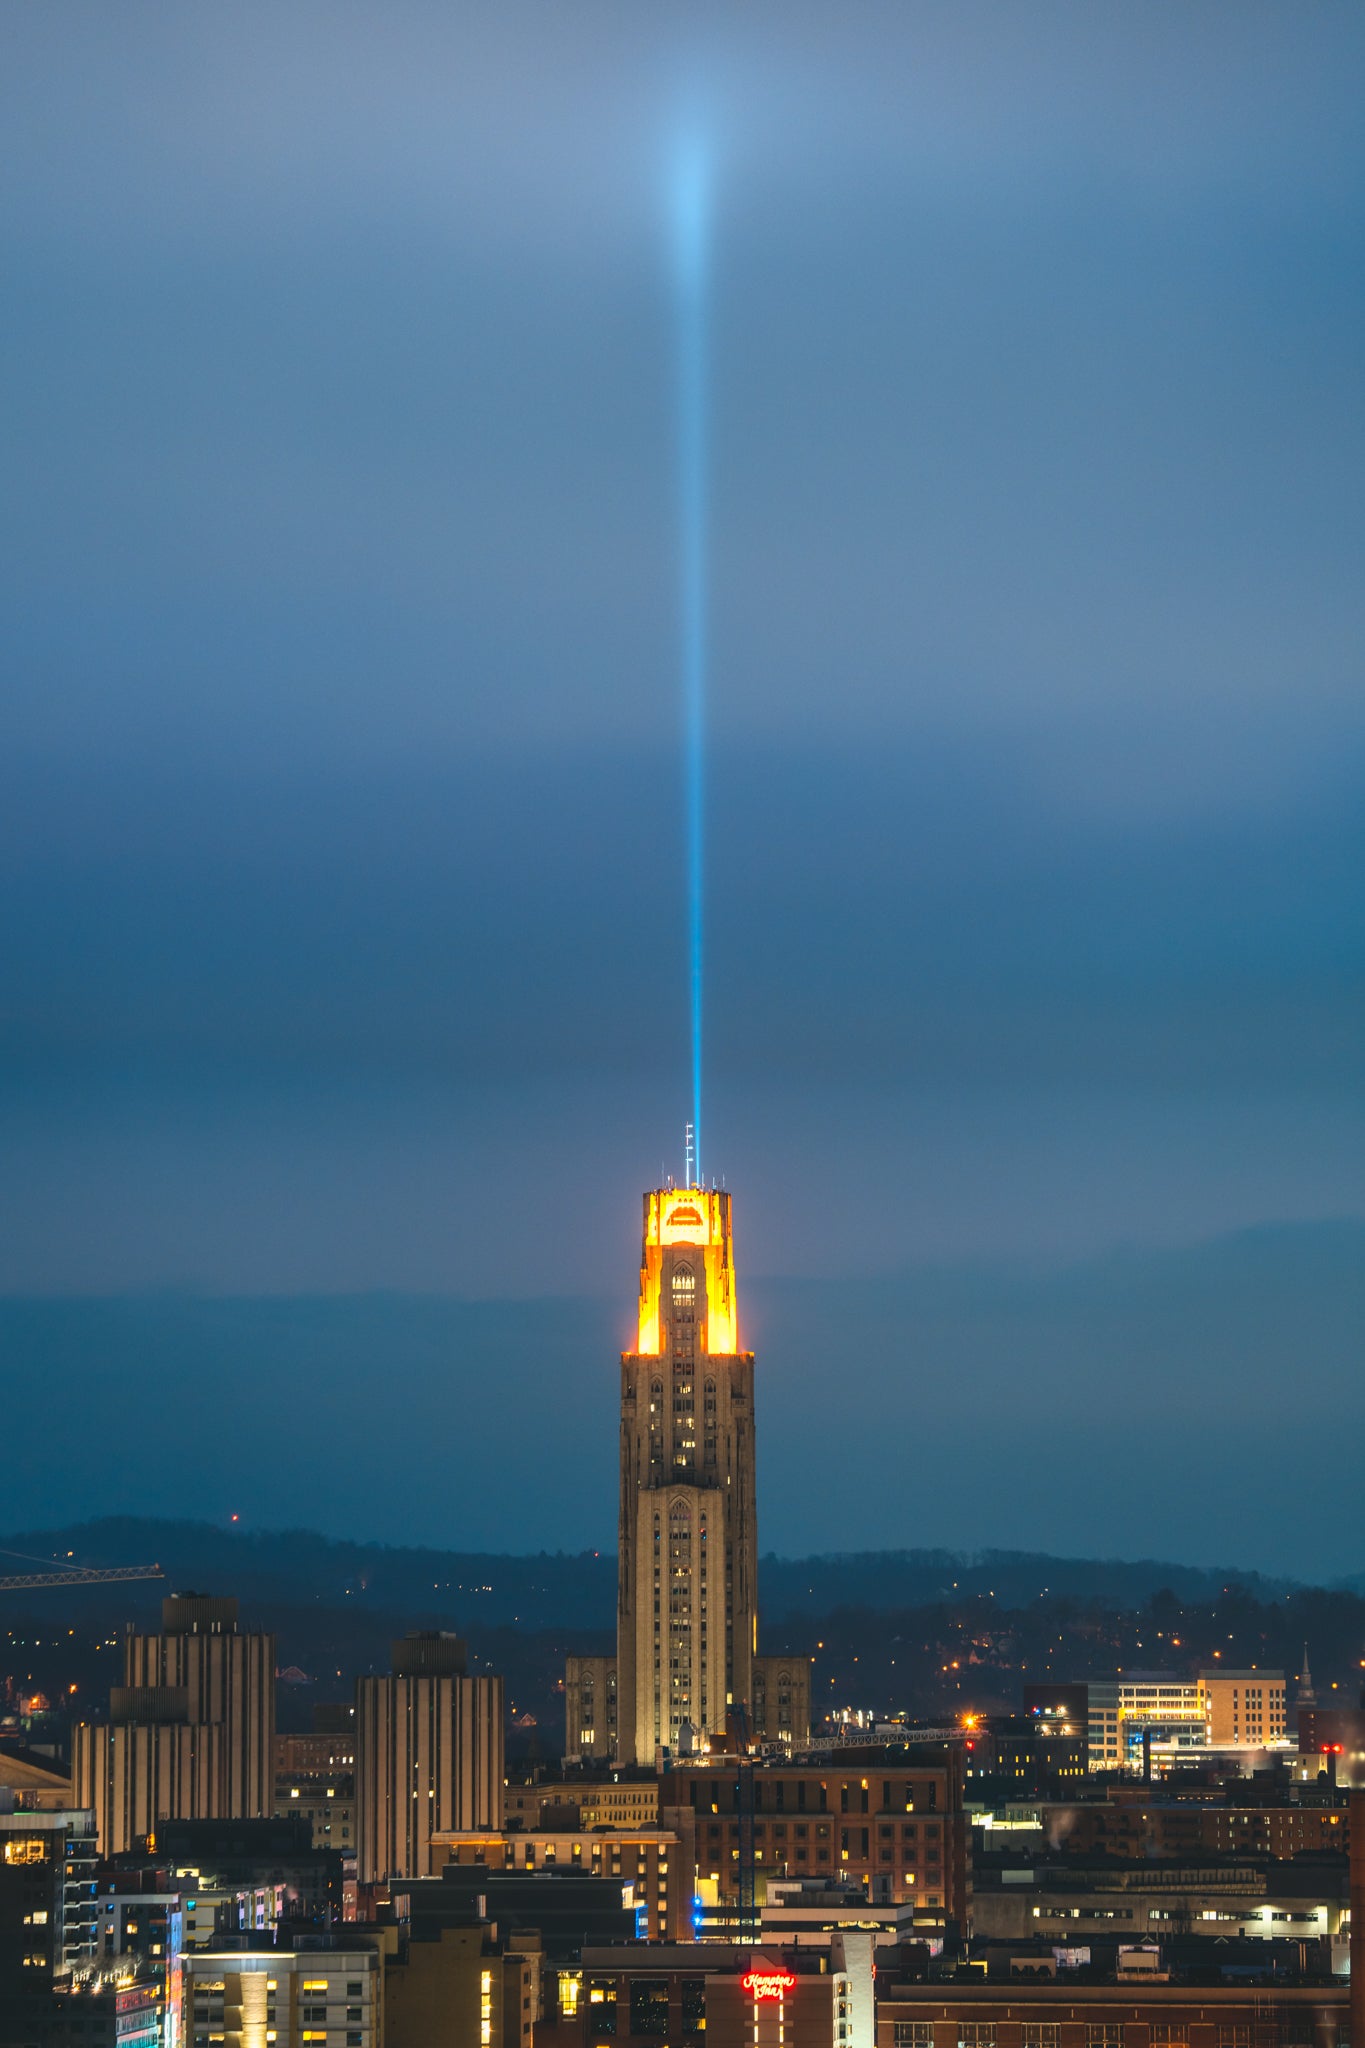 Cathedral of Learning Sun Bowl Victory Lights